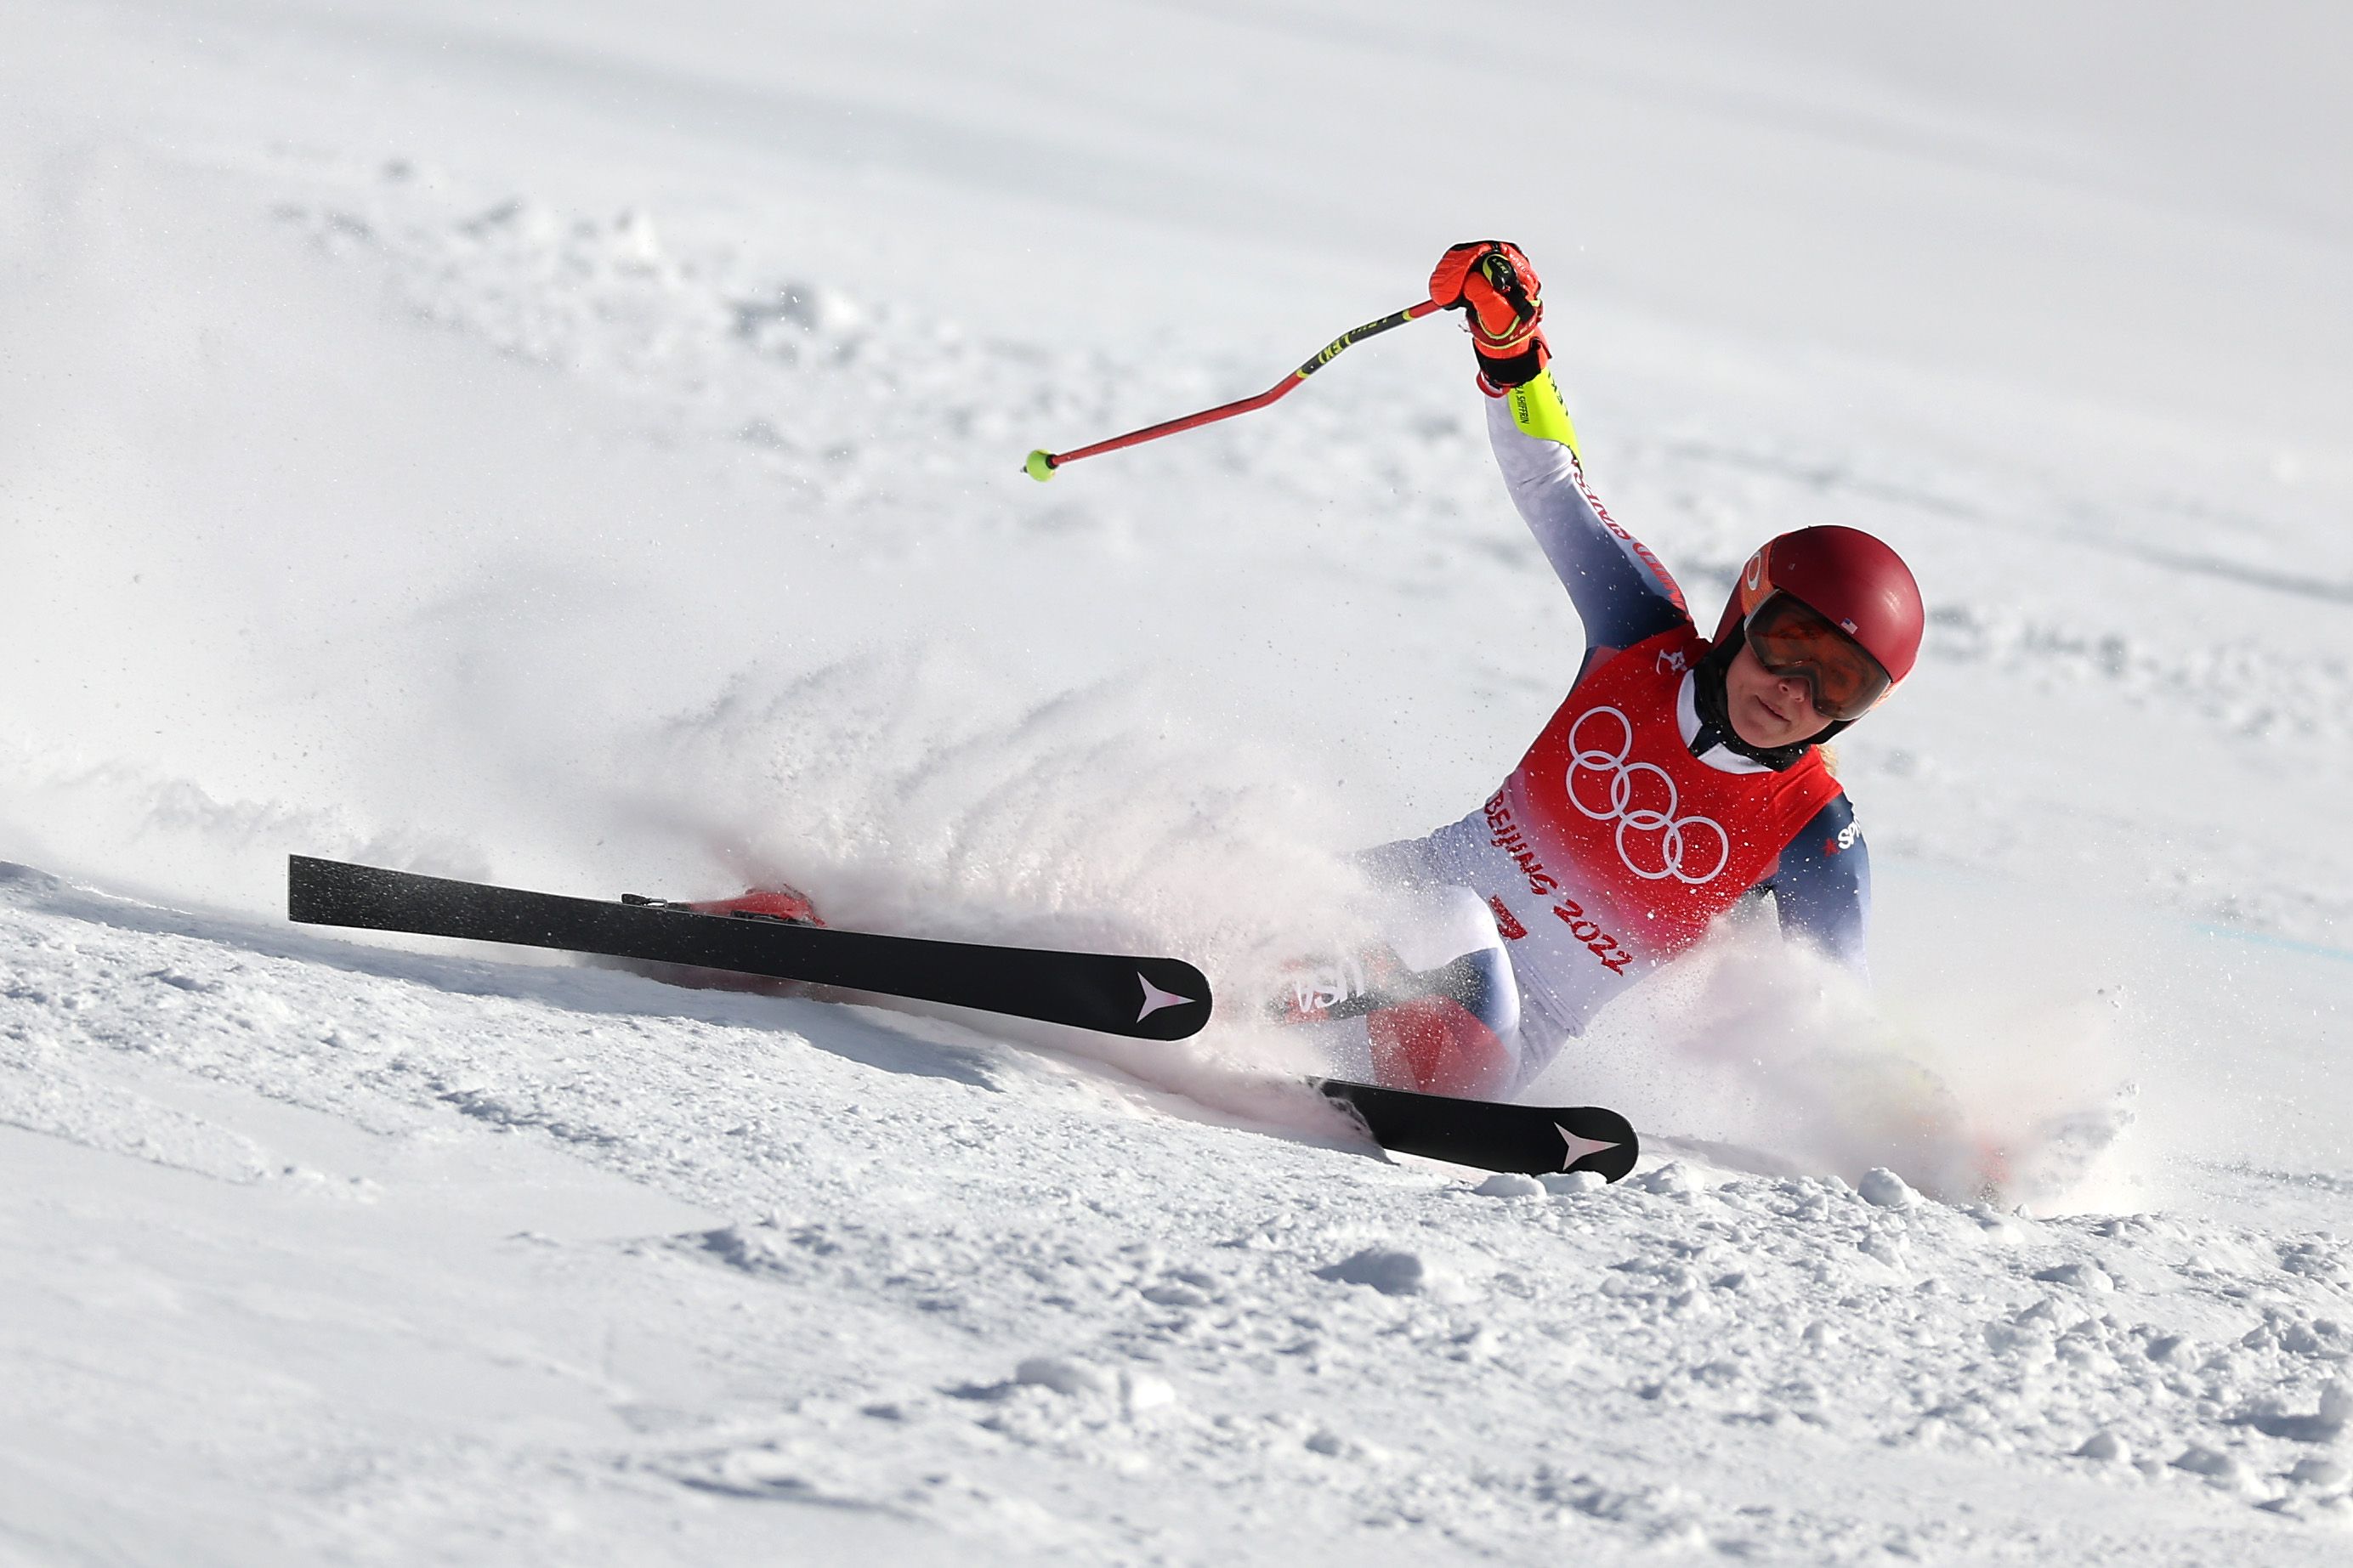 Mikaela Shiffrin crashed out of the giant slalom Monday on her first run.